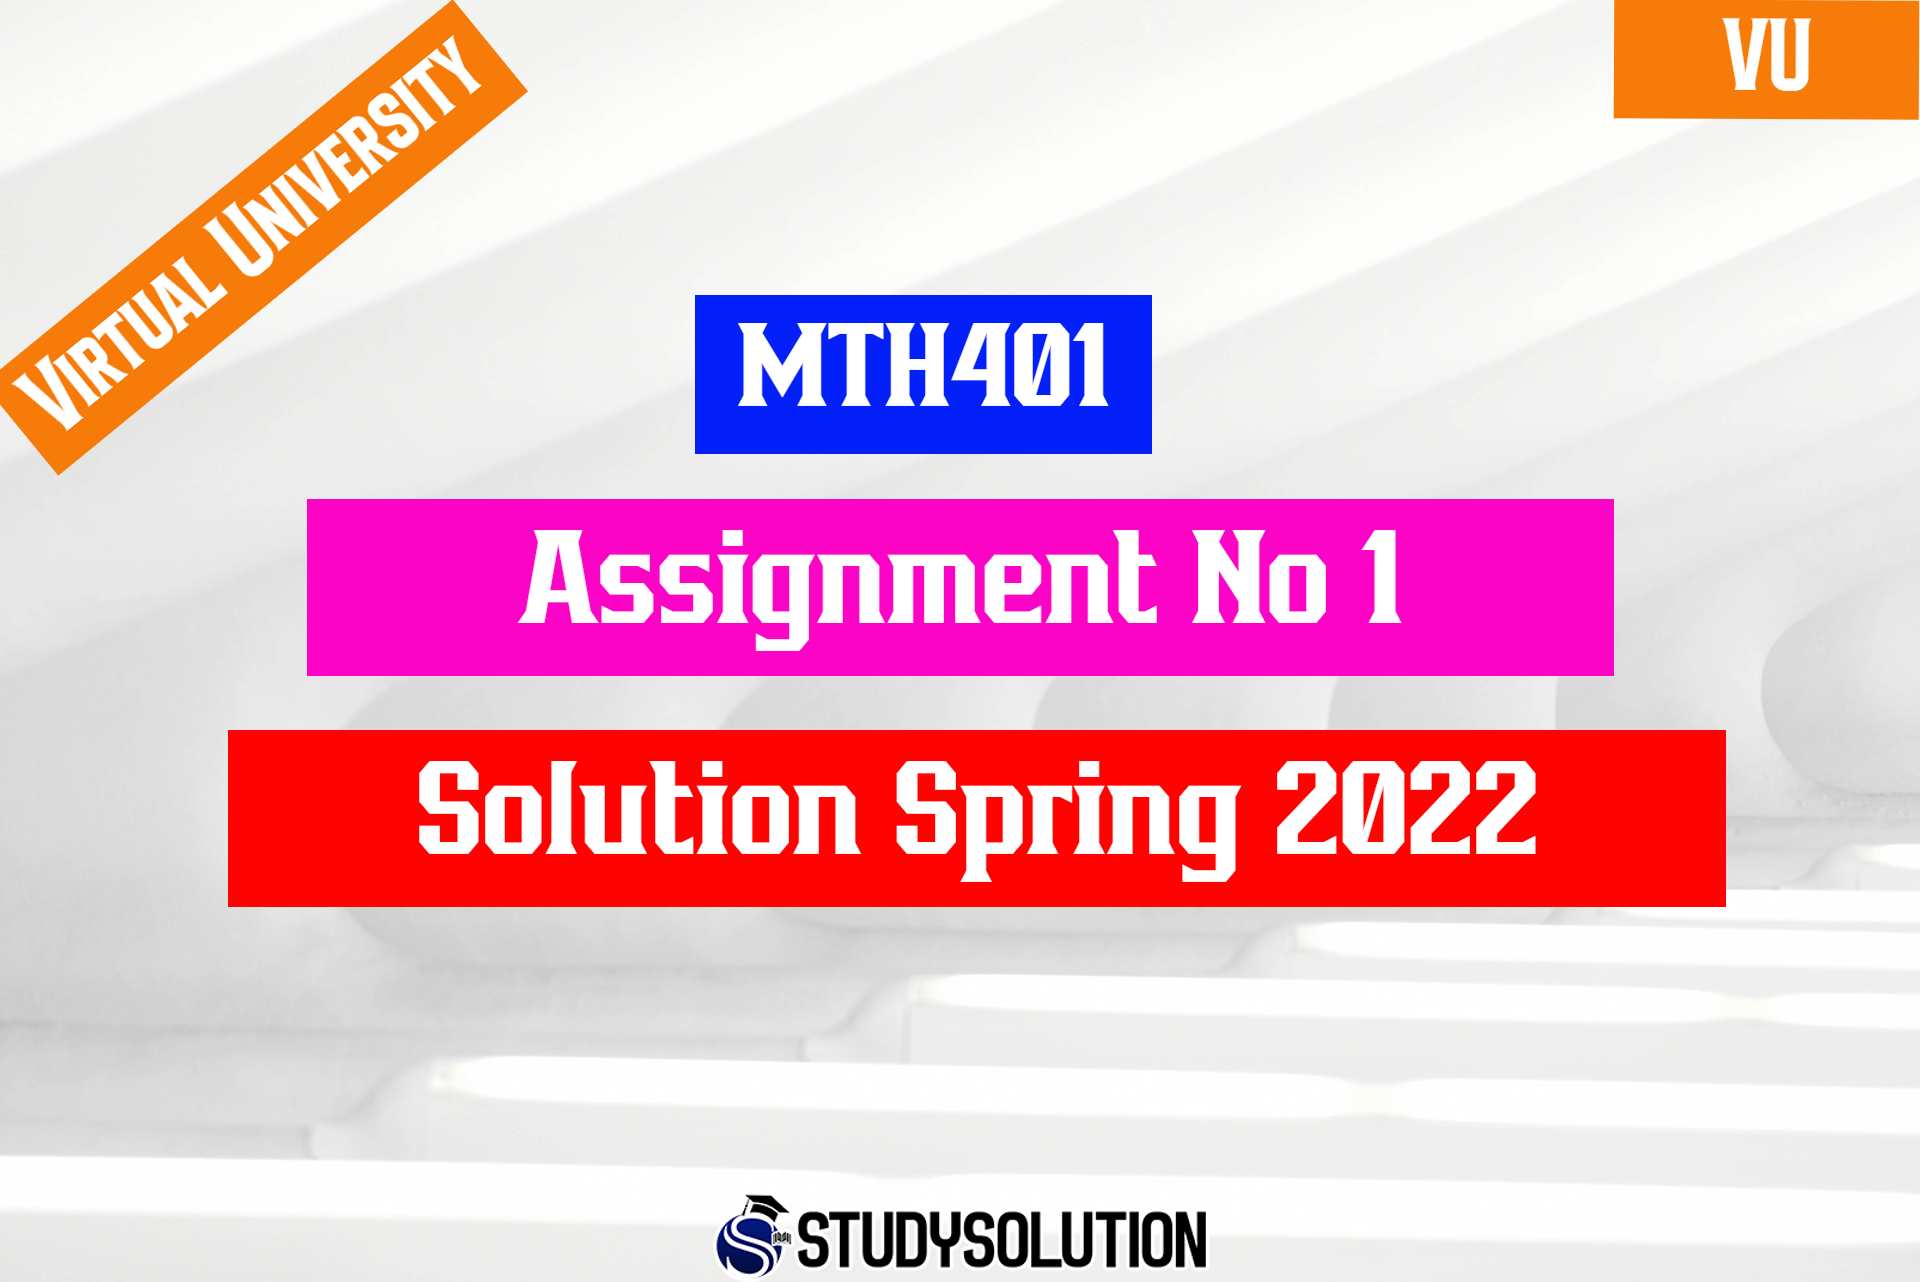 MTH401 Assignment No 1 Solution Spring 2022